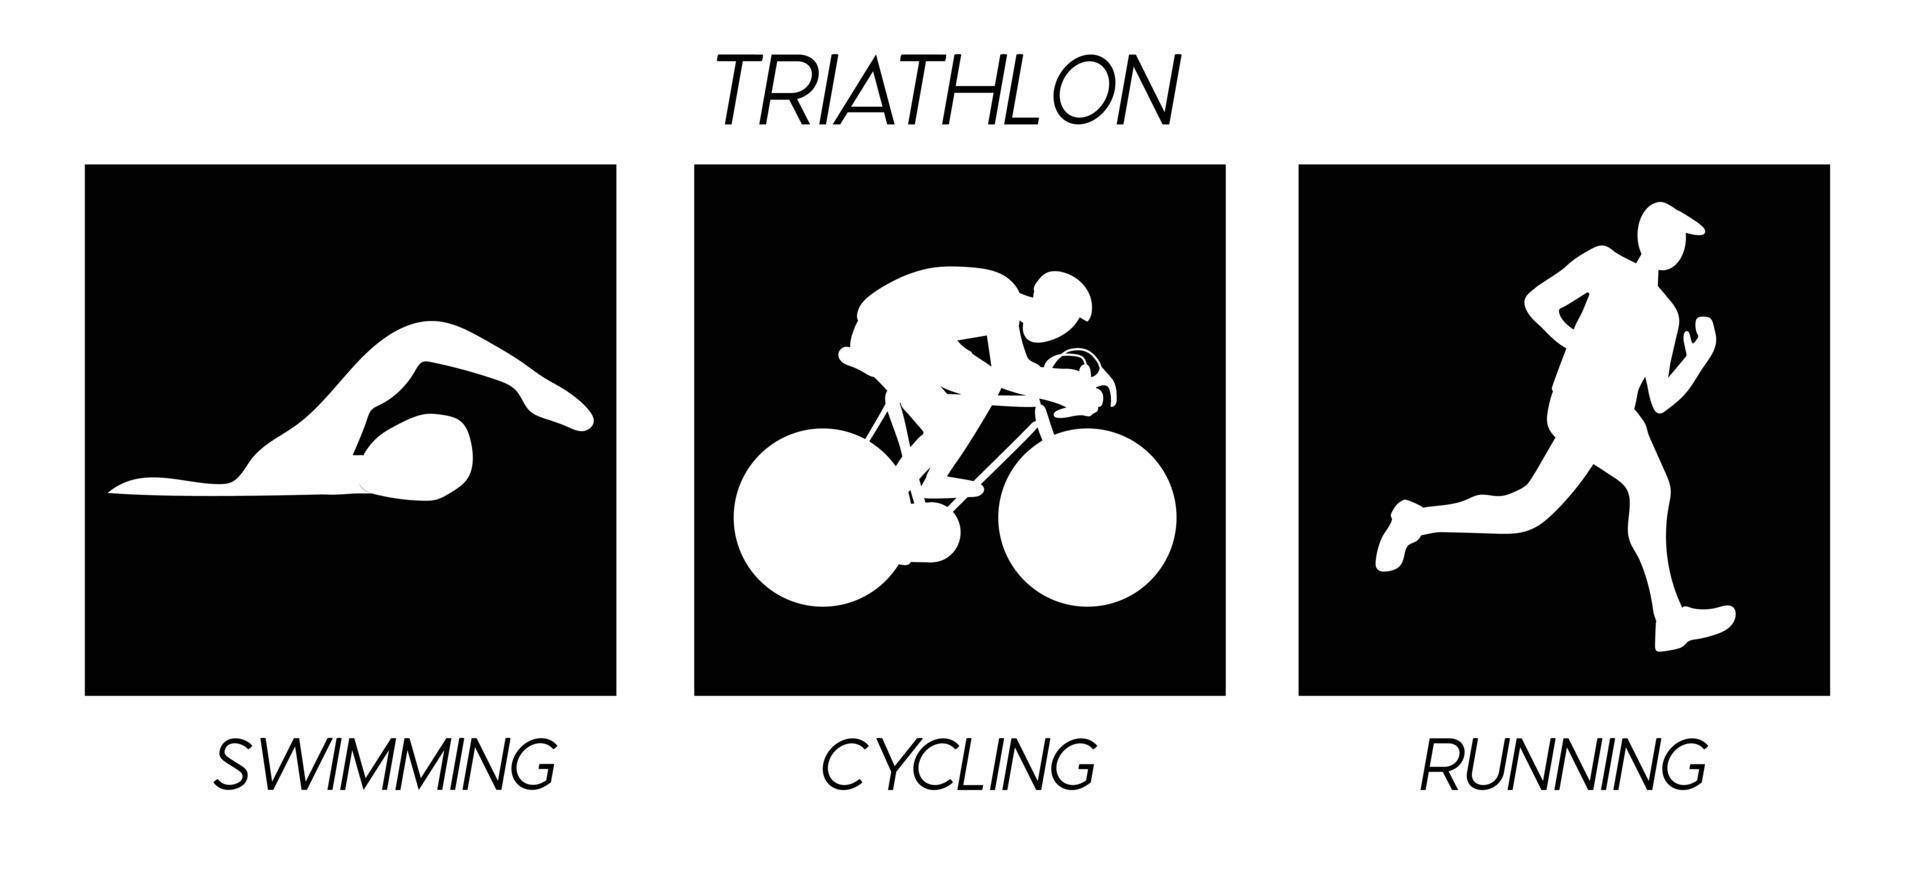 Triathlon. Silhouettes of athletes. Competition in swimming, cycling and running. vector